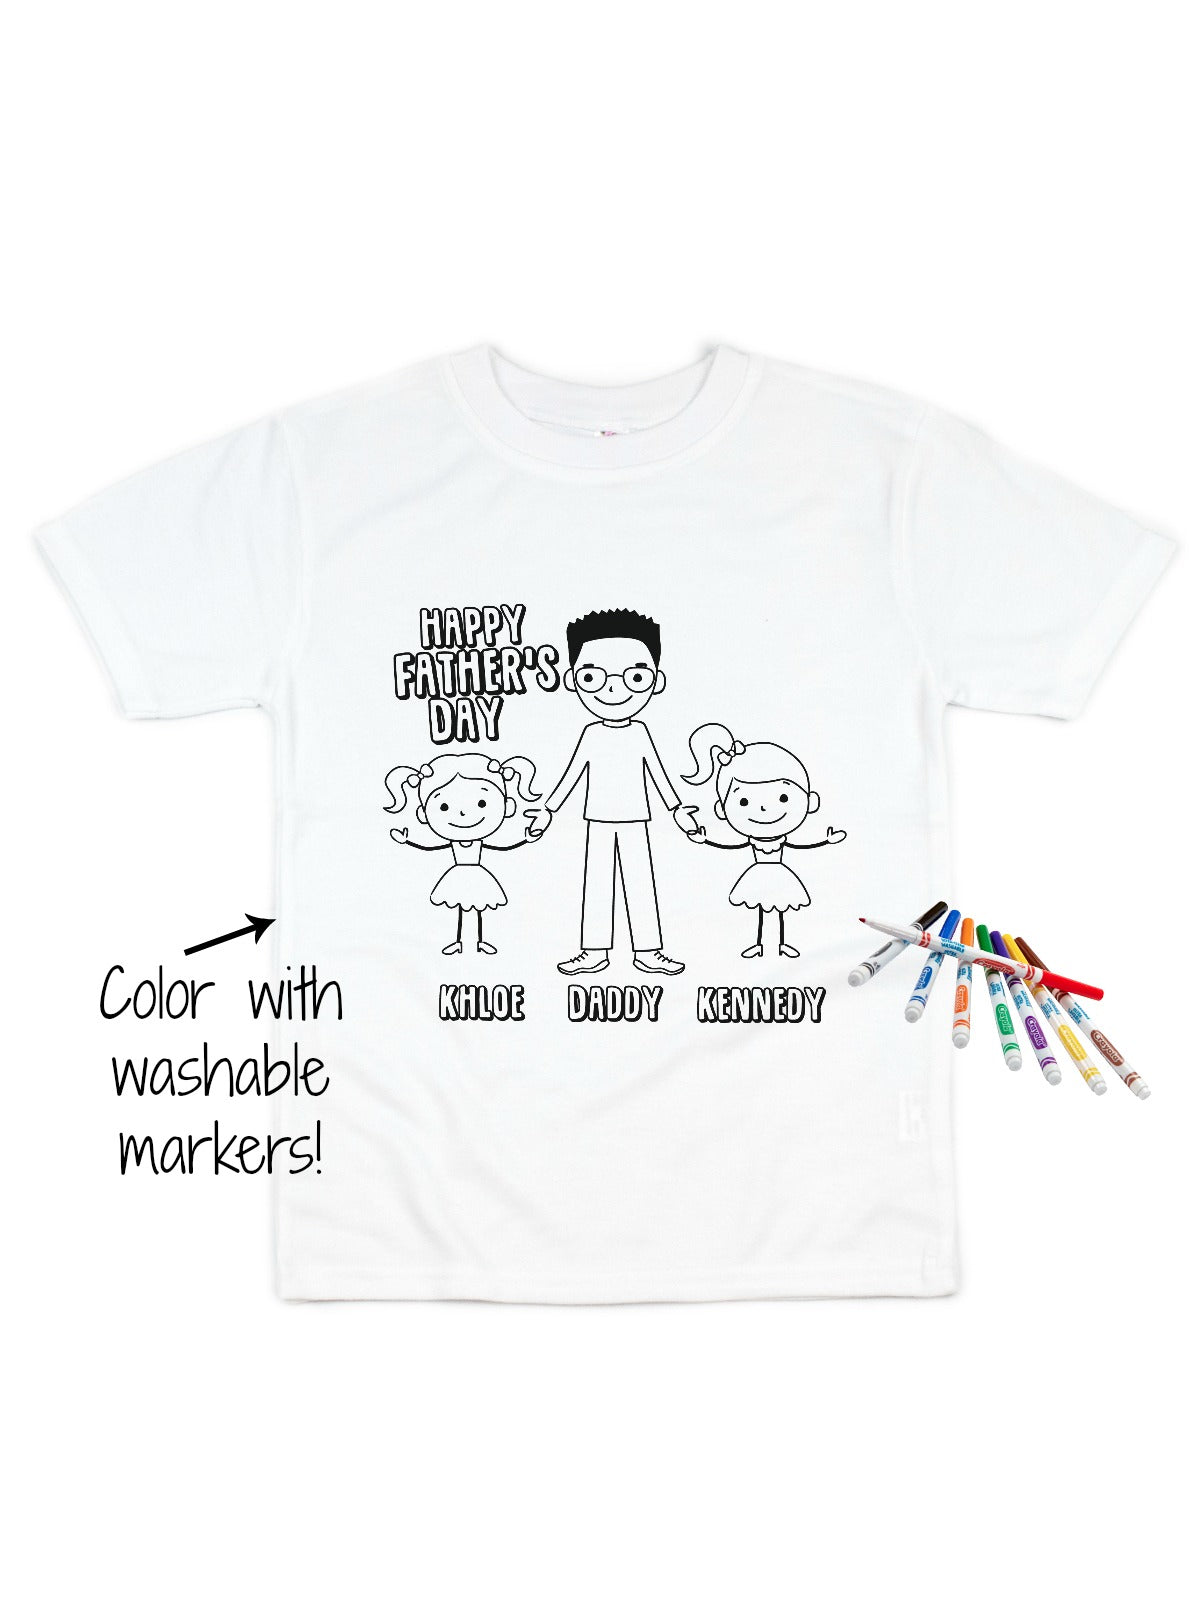 Color Your Own Shirt | Color in Shirt with Washable Markers | Creative Gift for Kids | Kids Birthday Gift | Art Gift for Kids | Kid Activity